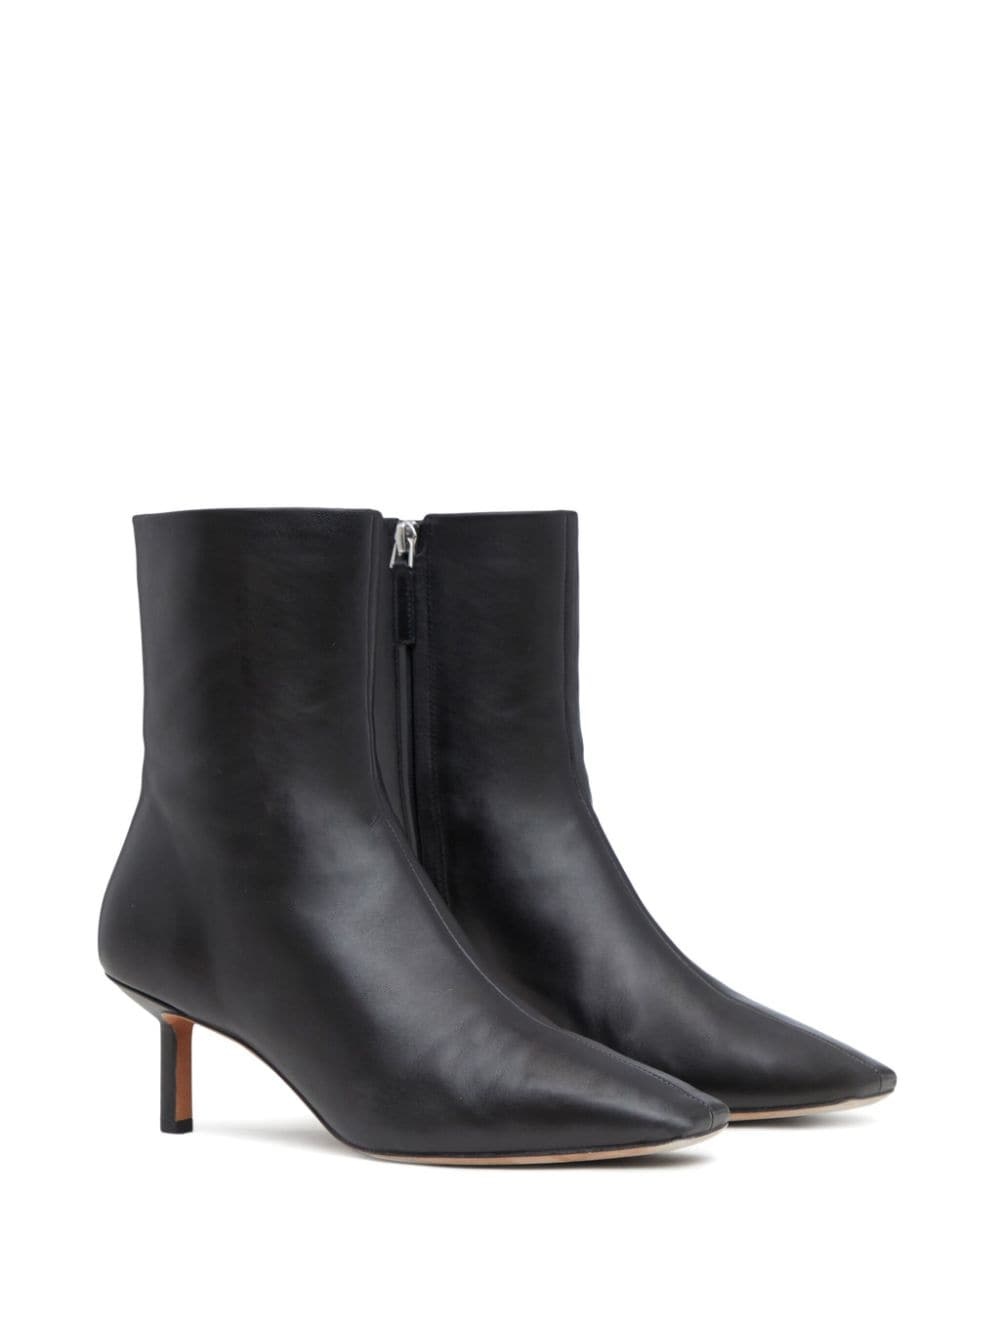 Nell 65mm leather boots - 2